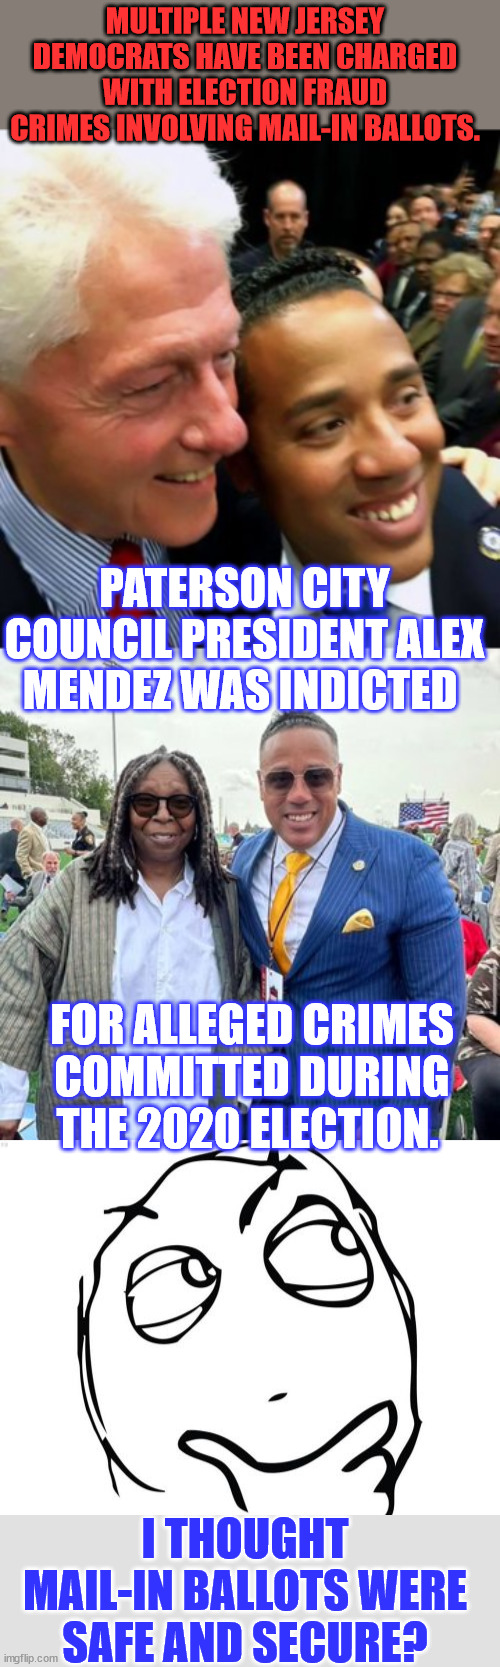 More and more stories emerge of 2020 election fraud... | MULTIPLE NEW JERSEY DEMOCRATS HAVE BEEN CHARGED WITH ELECTION FRAUD CRIMES INVOLVING MAIL-IN BALLOTS. PATERSON CITY COUNCIL PRESIDENT ALEX MENDEZ WAS INDICTED; FOR ALLEGED CRIMES COMMITTED DURING THE 2020 ELECTION. I THOUGHT MAIL-IN BALLOTS WERE SAFE AND SECURE? | image tagged in memes,more,election 2020,fraud,proof | made w/ Imgflip meme maker